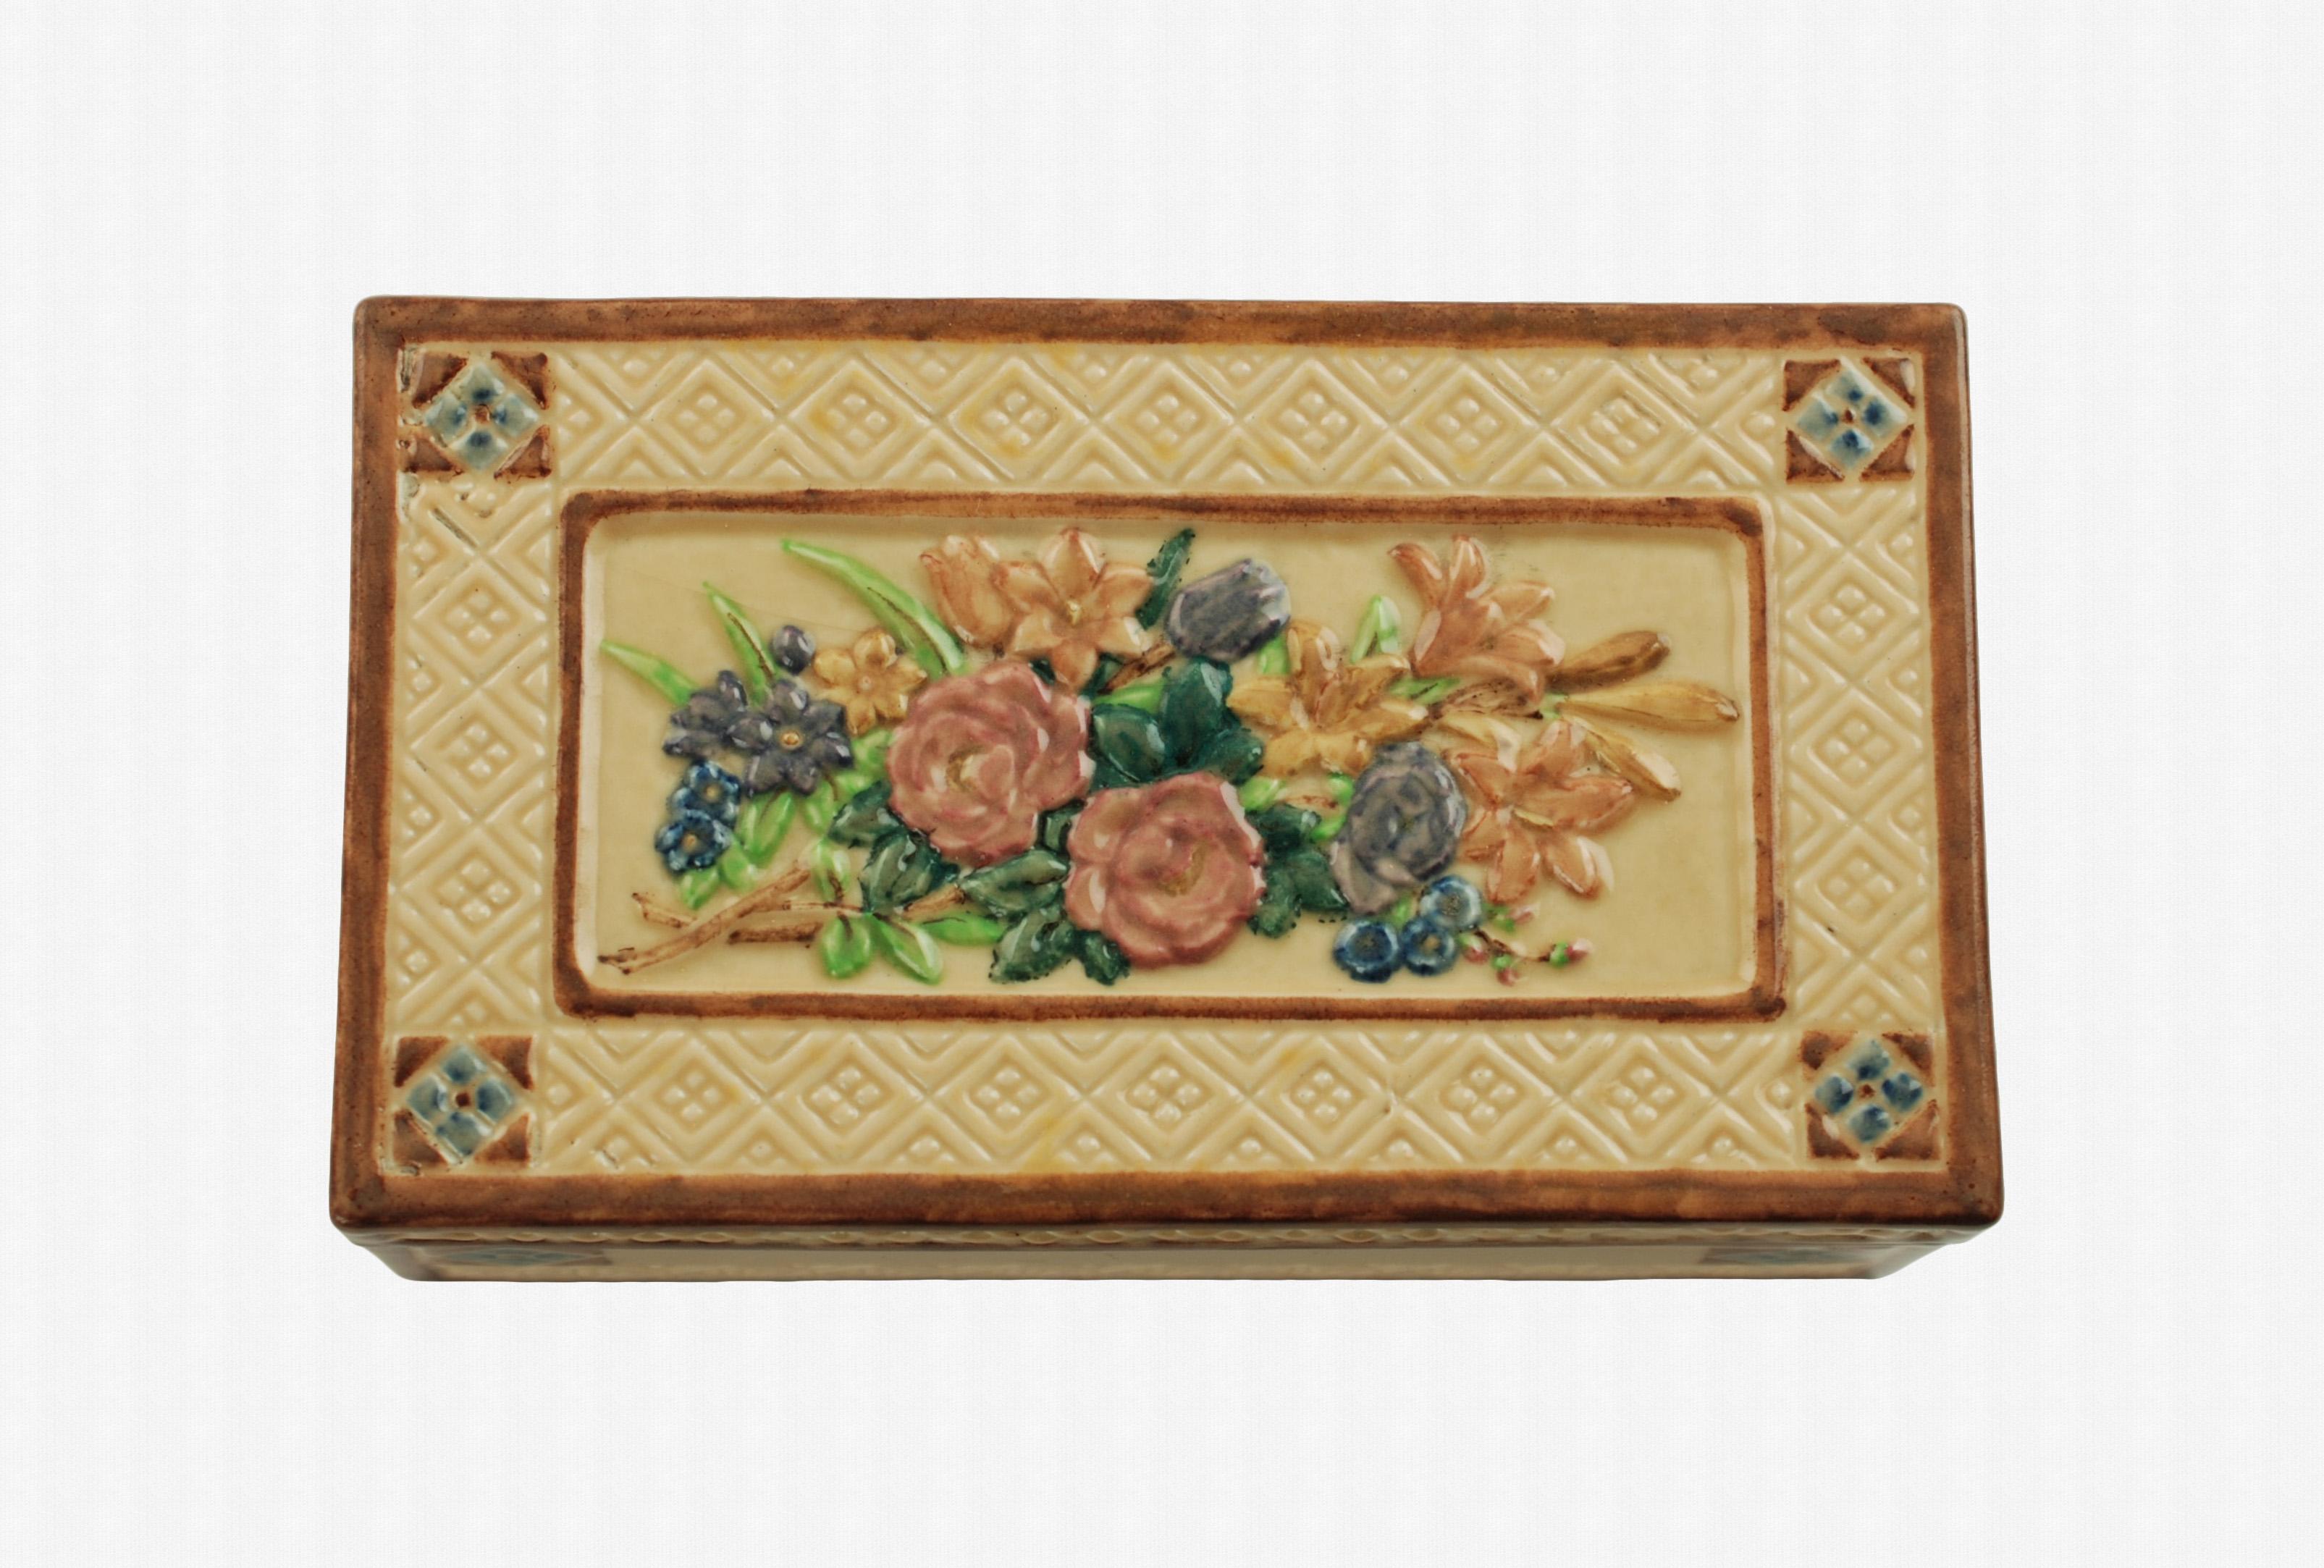 Signed Rookwood Pottery box by Sara Sax. This gorgeous ceramic lidded rectangular box was made by Rookwood Pottery of Cincinnati, Ohio, and decorated by renowned artist, Sara Sax. Rookwood has long been recognized as one of the premier producers of